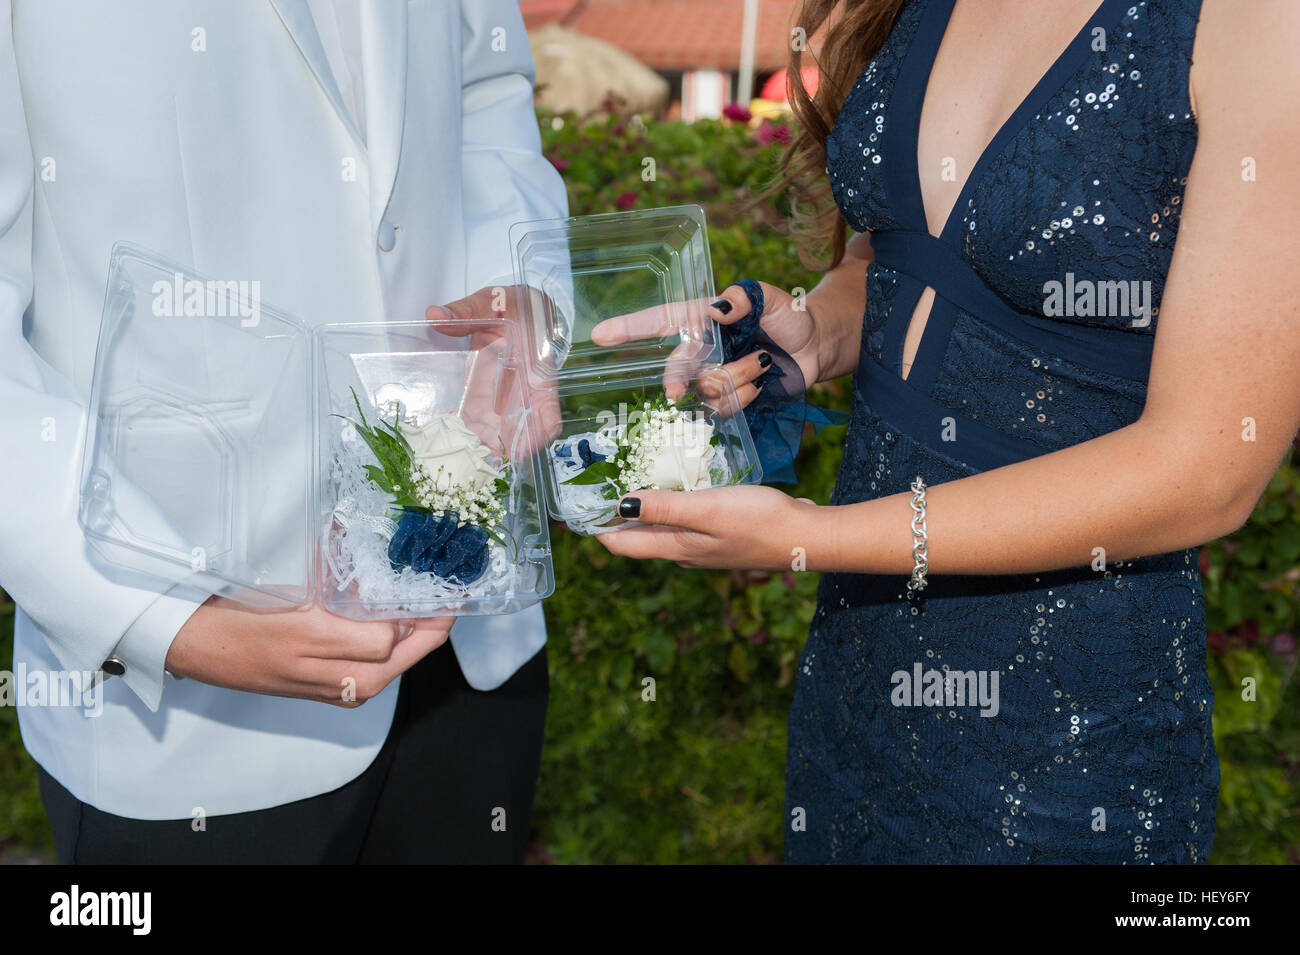 Prom dates exchanging flower corsages. Stock Photo